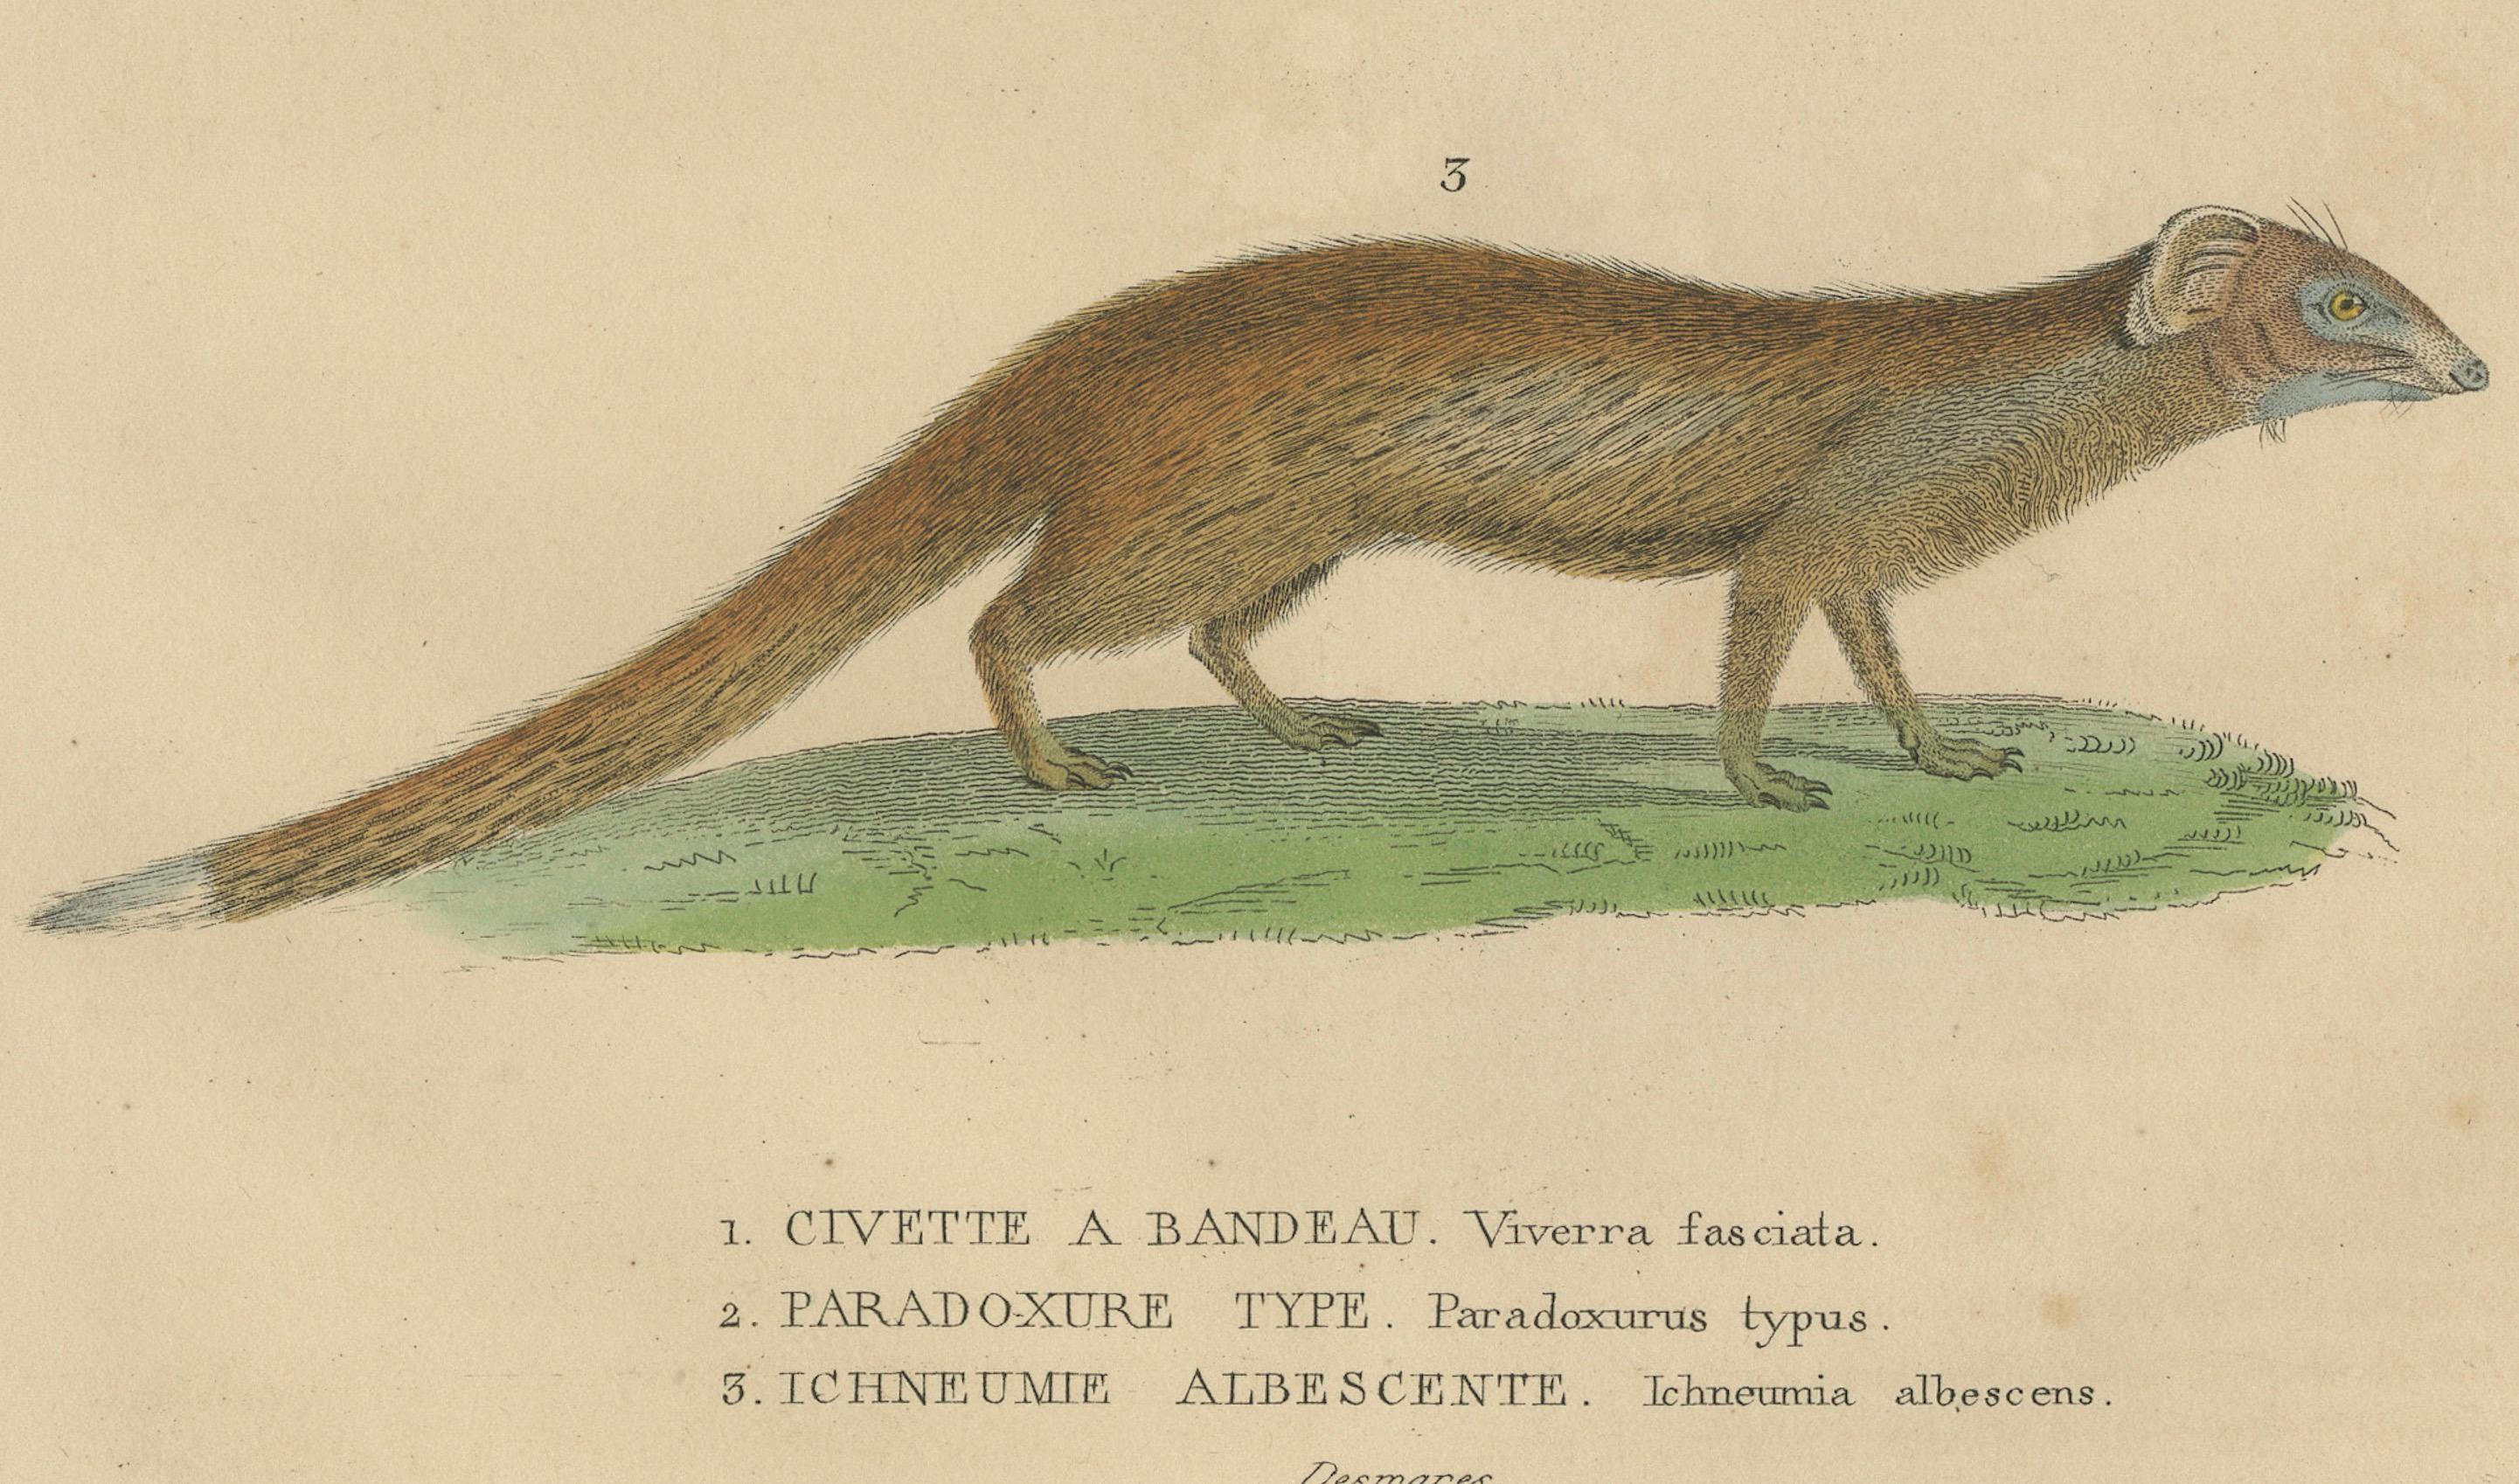 This original hand-colored engraving showcases three distinct mammals, each labeled in French with their scientific names:

1. **Viverra fasciata** - Known as the banded palm civet. It's characterized by the dark bands across its back and long body,